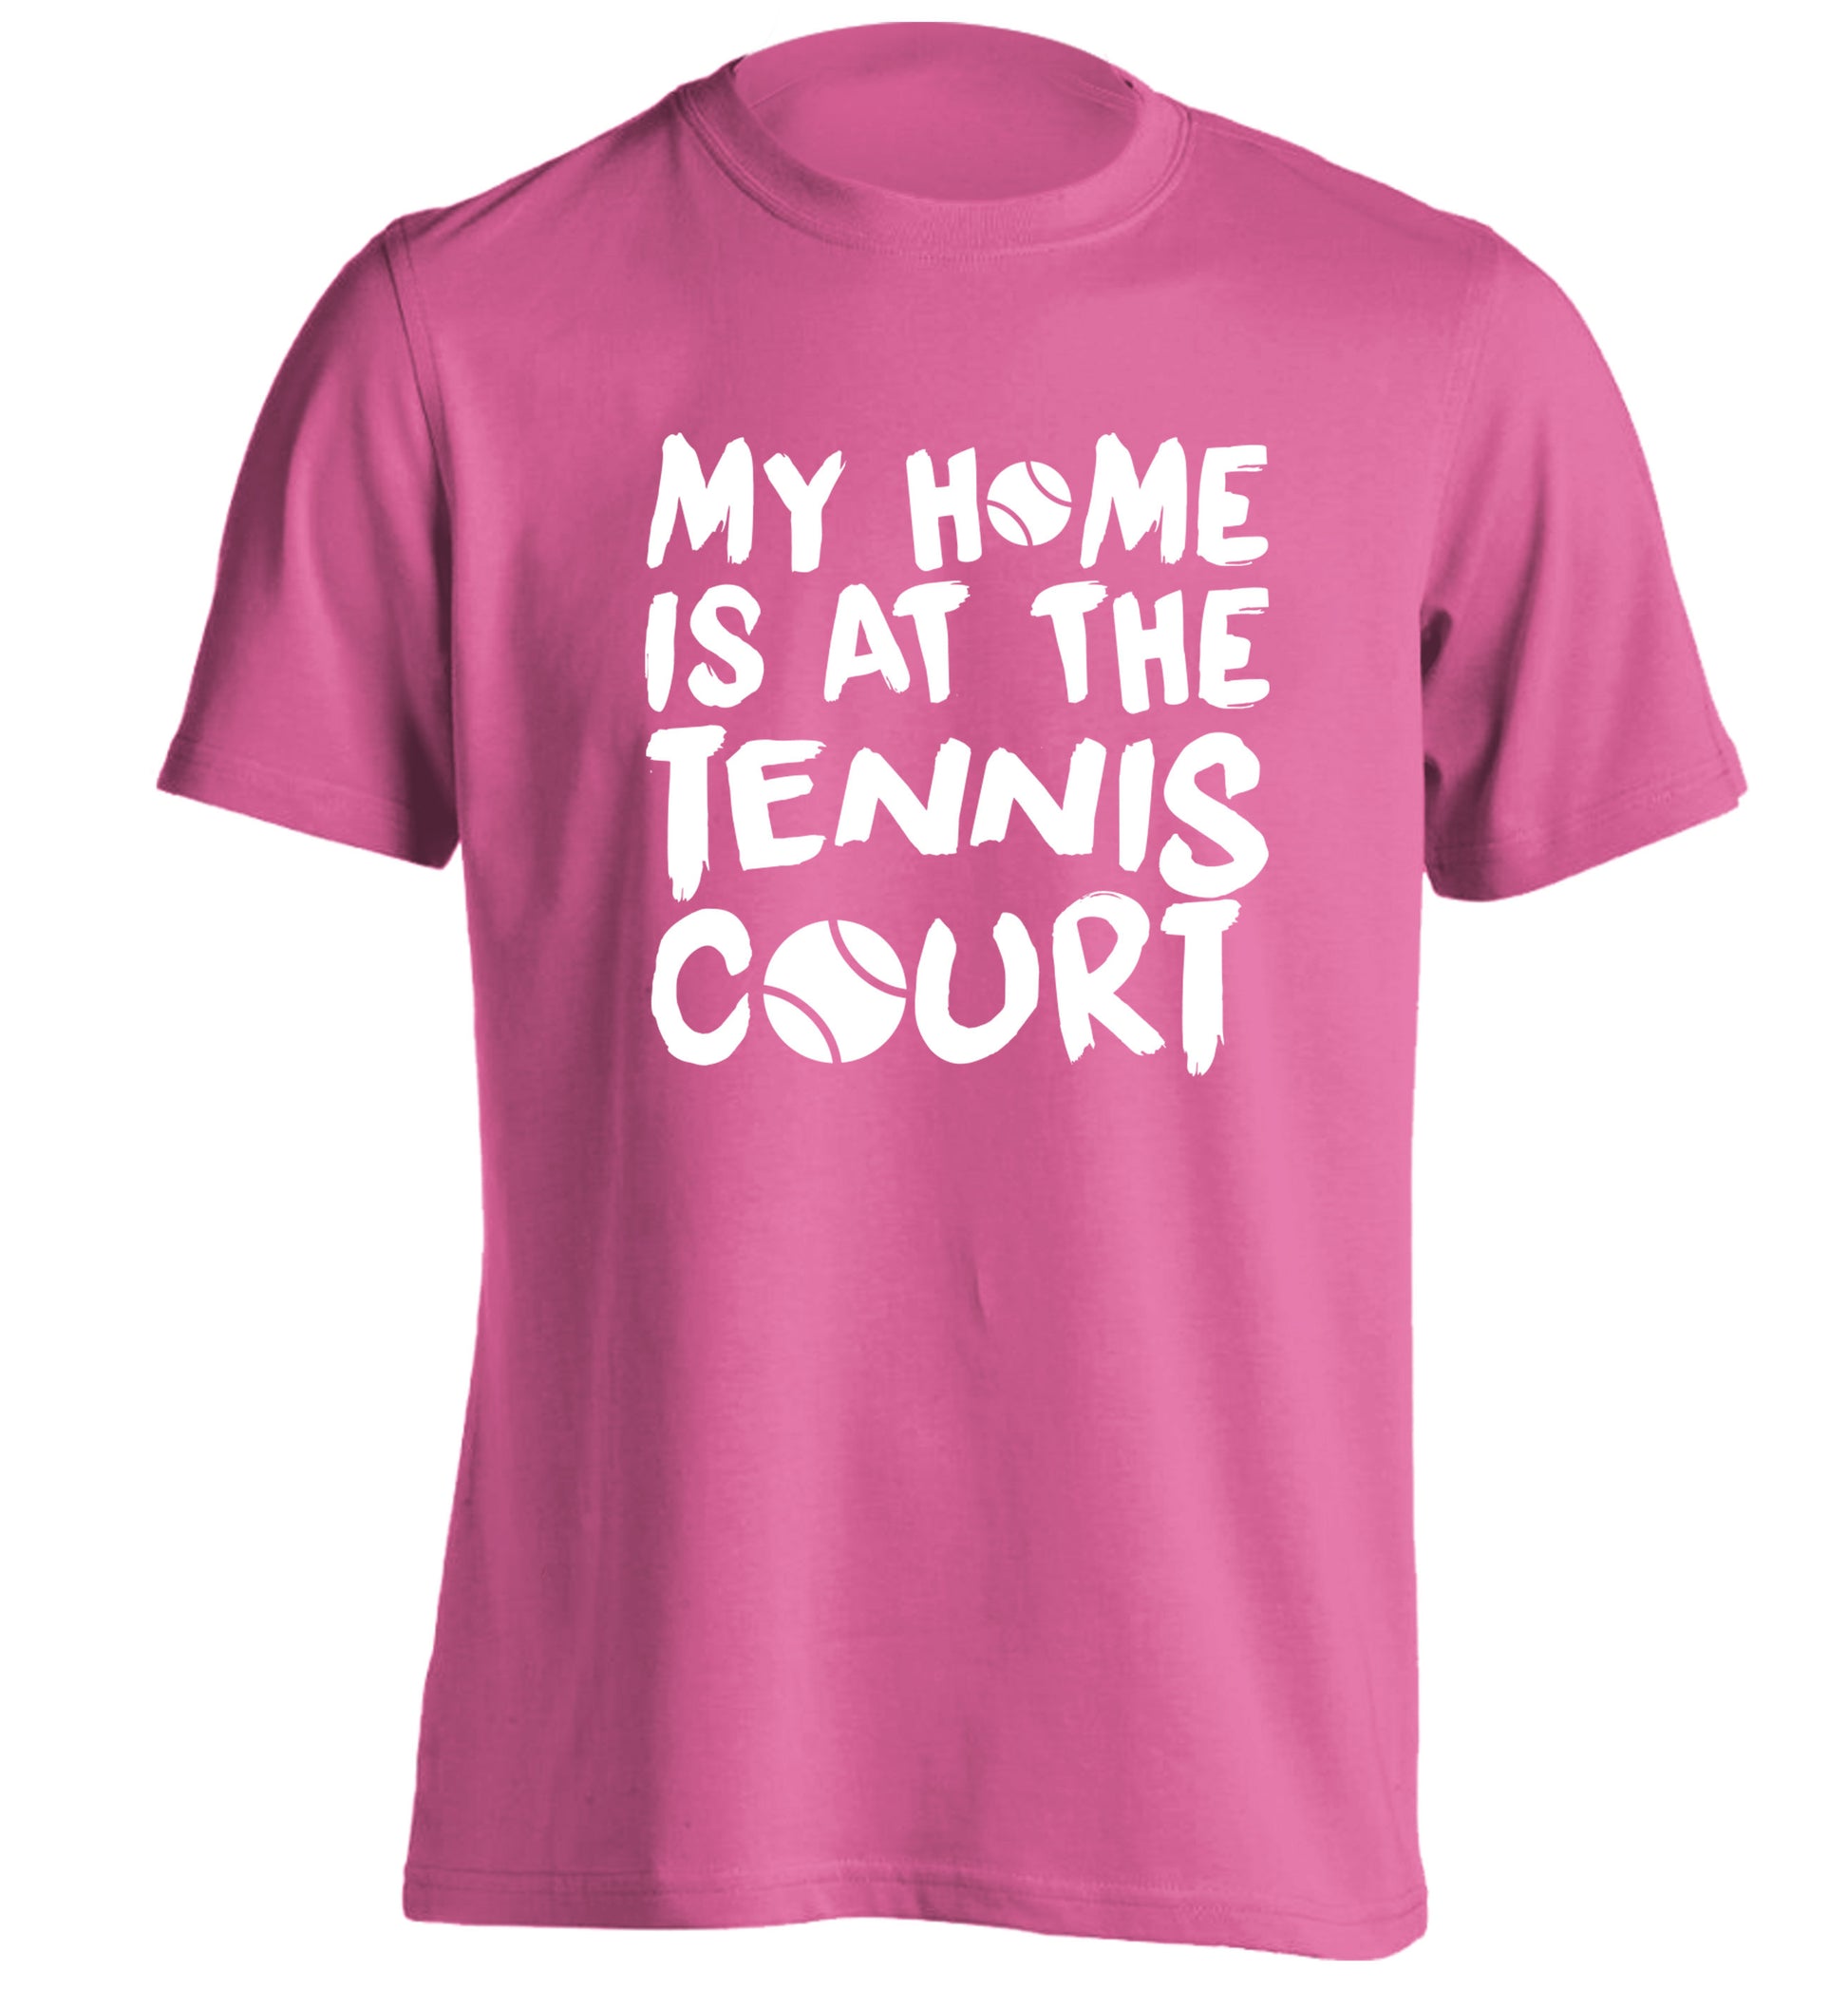 My home is at the tennis court adults unisex pink Tshirt 2XL